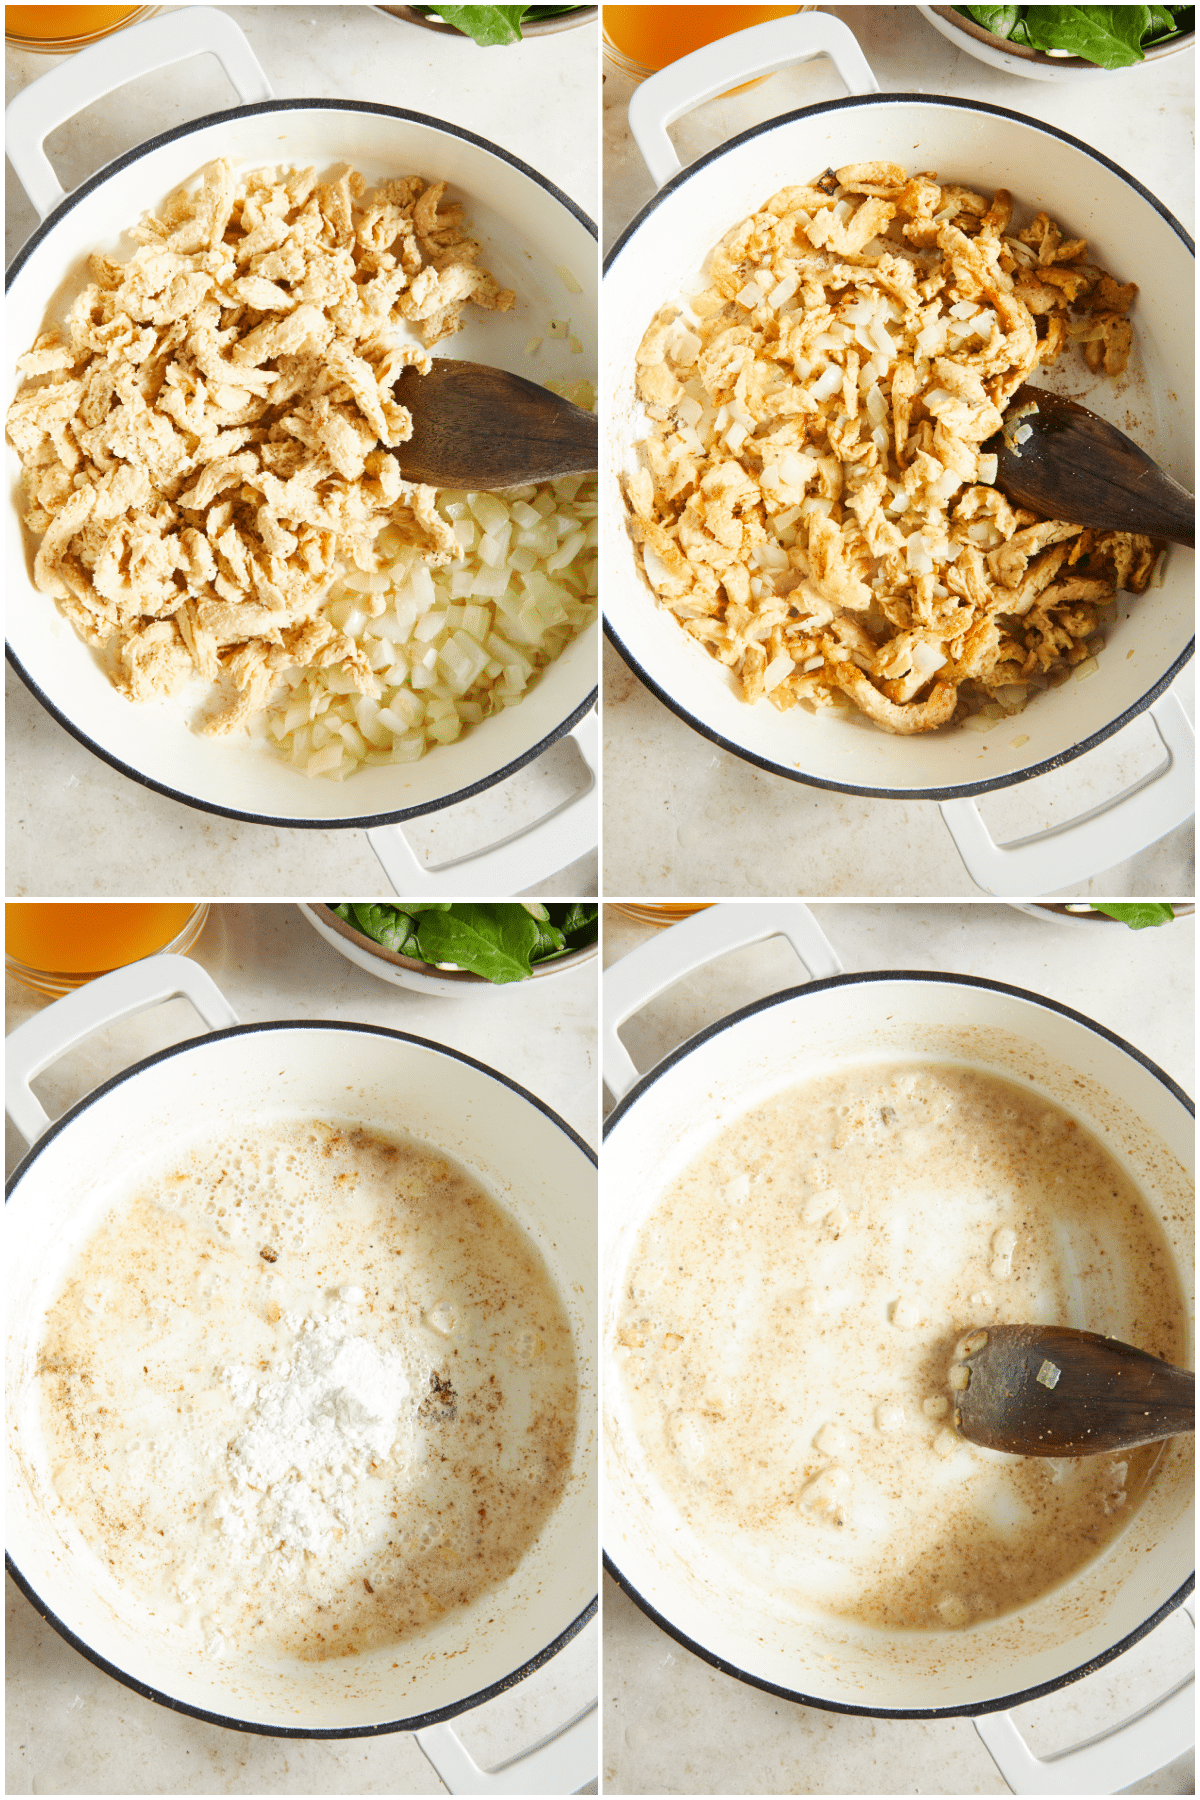 A four image collage showing how to make vegan chicken piccata, part 2: Add soy curls to sautéed onion and garlic, continue to cook. Remove from pan, and add butter and flour.